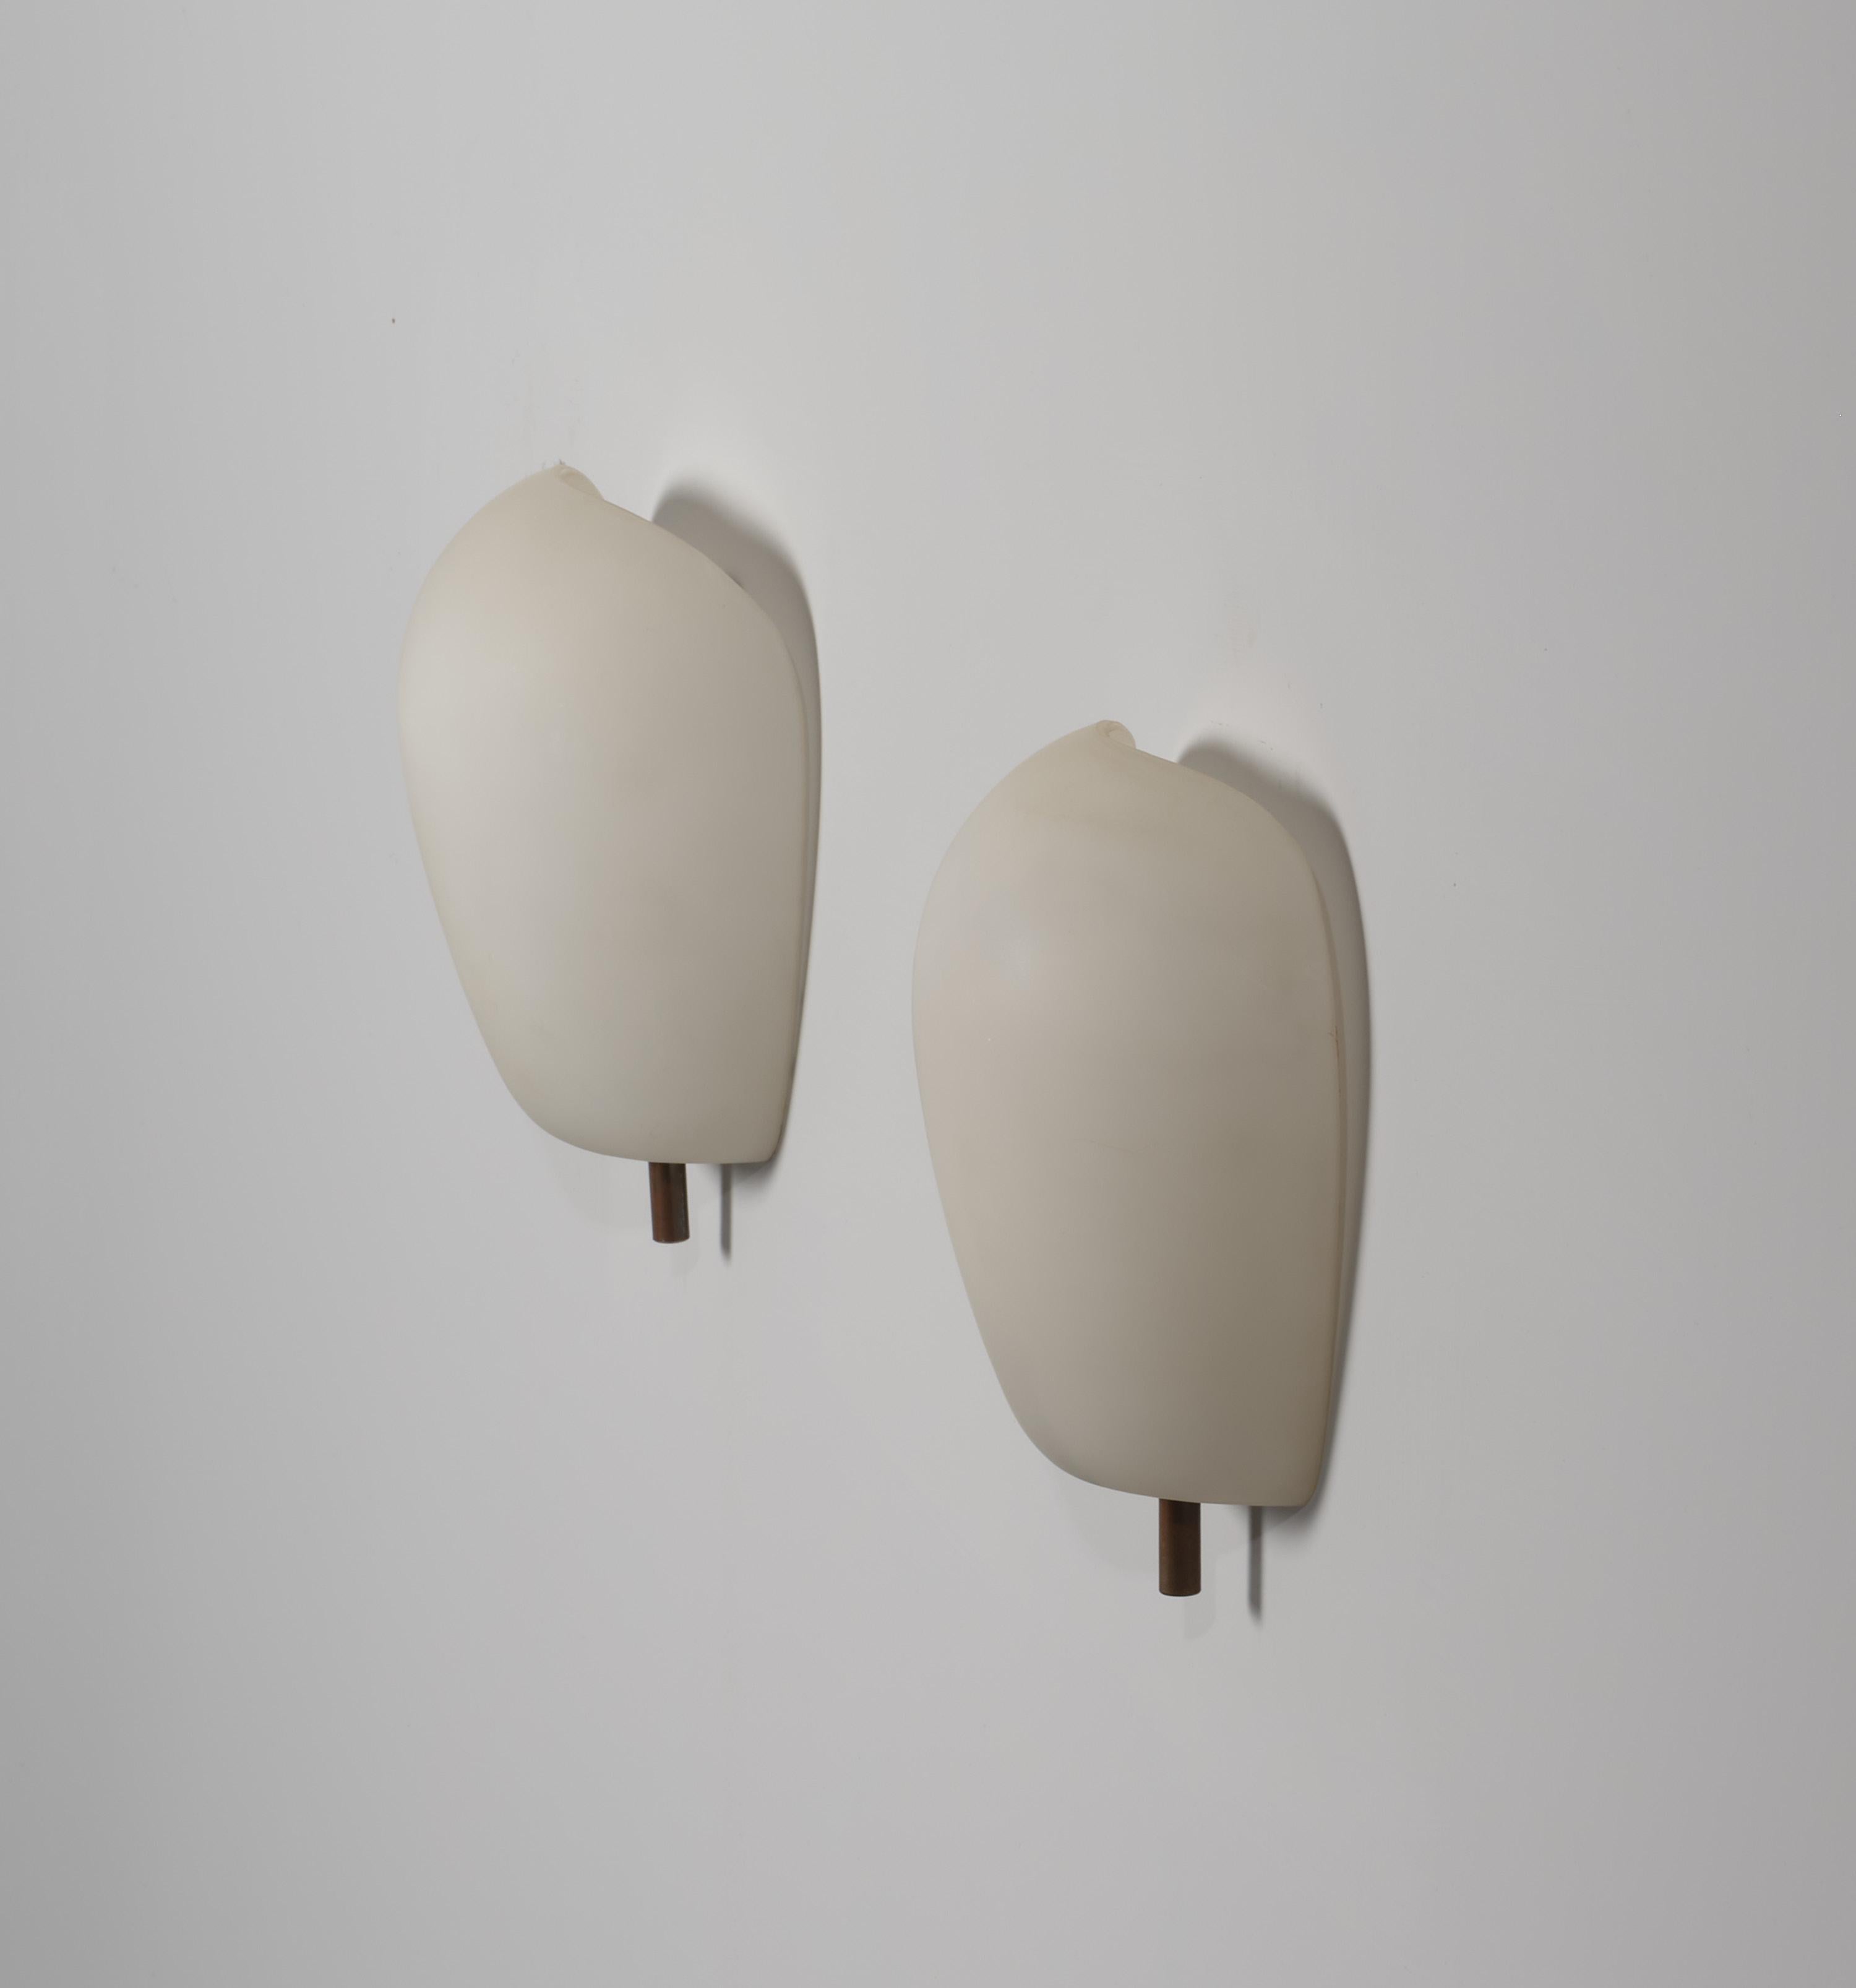 Elegant and refined, this pair of wall sconces showcases iconic Italian design from the 1950s, attributed to the renowned Fontana Arte. Crafted with opaline glass in a graceful shell shape and adorned with brass details, these sconces exude timeless